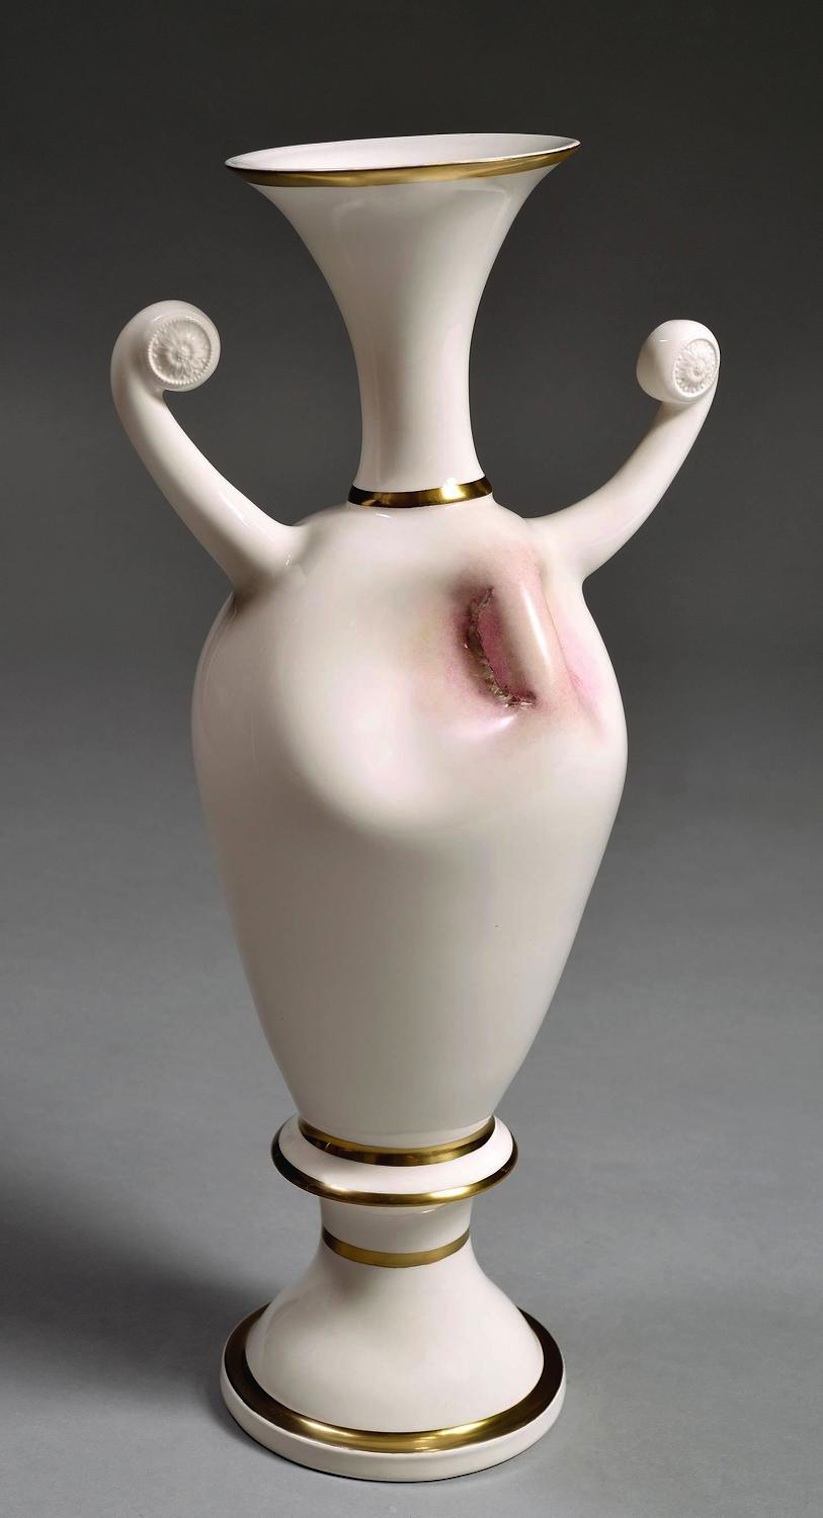 Laurent Craste Violently Alters 18th and 19th Century European Porcelain